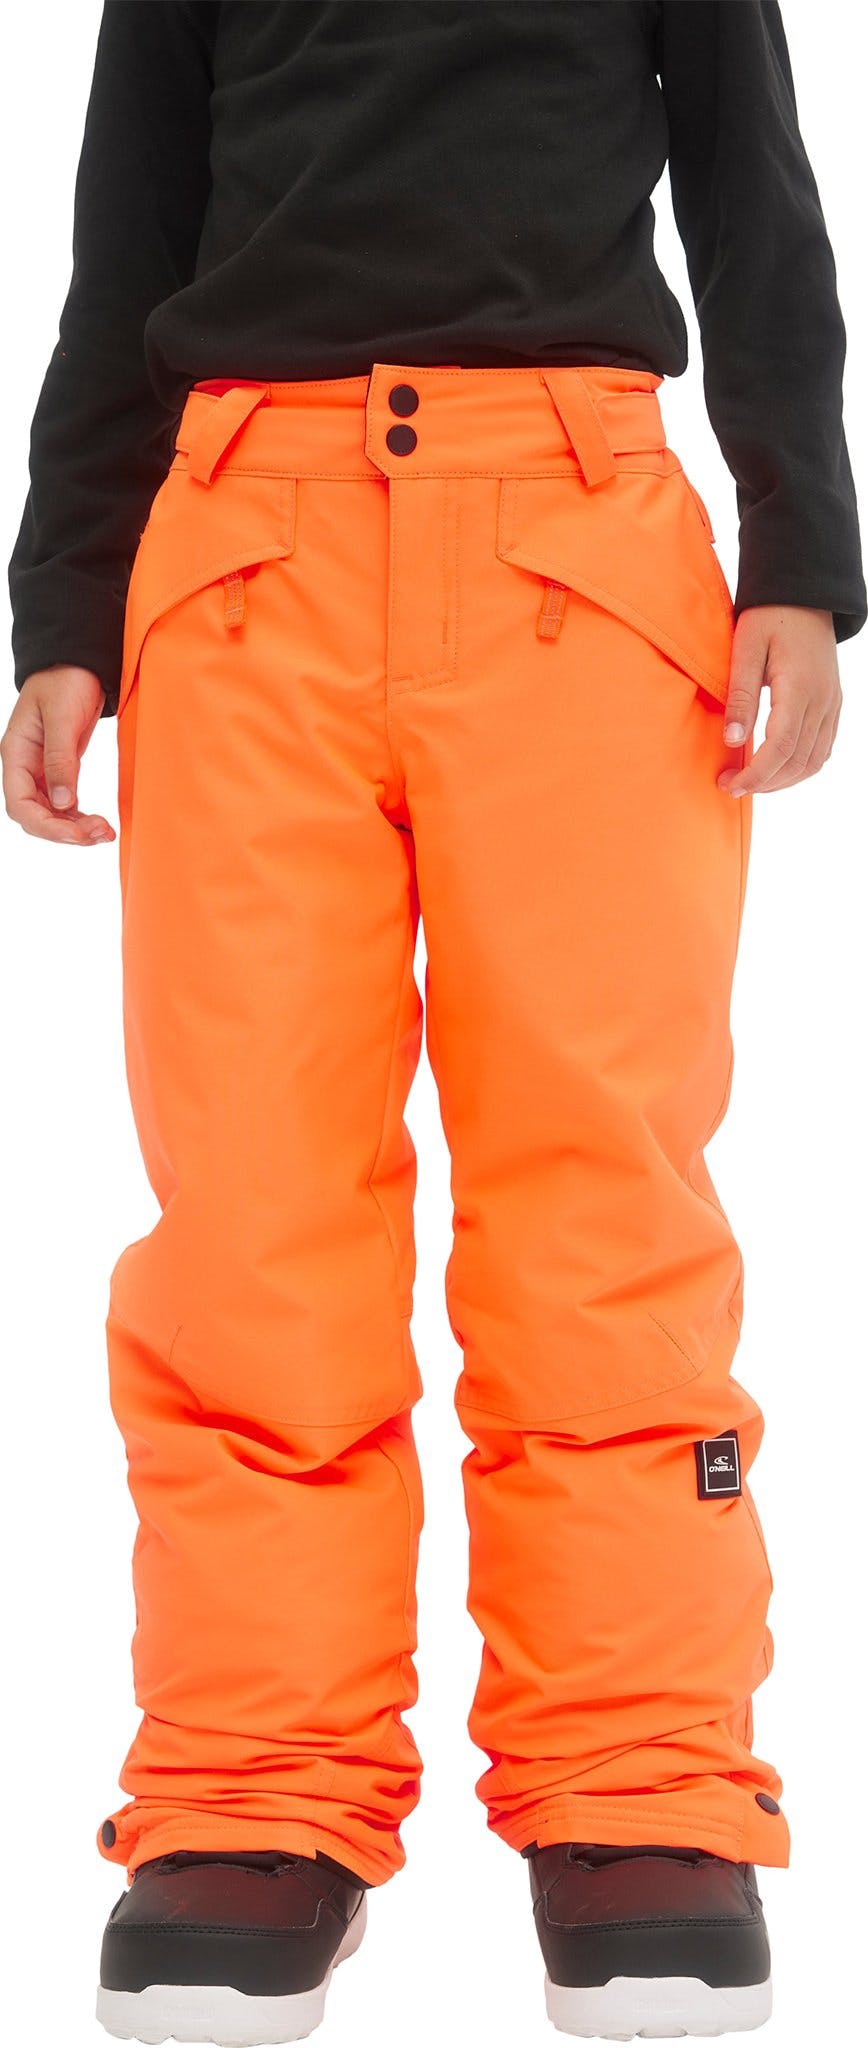 Product image for Anvil Pants - Youth